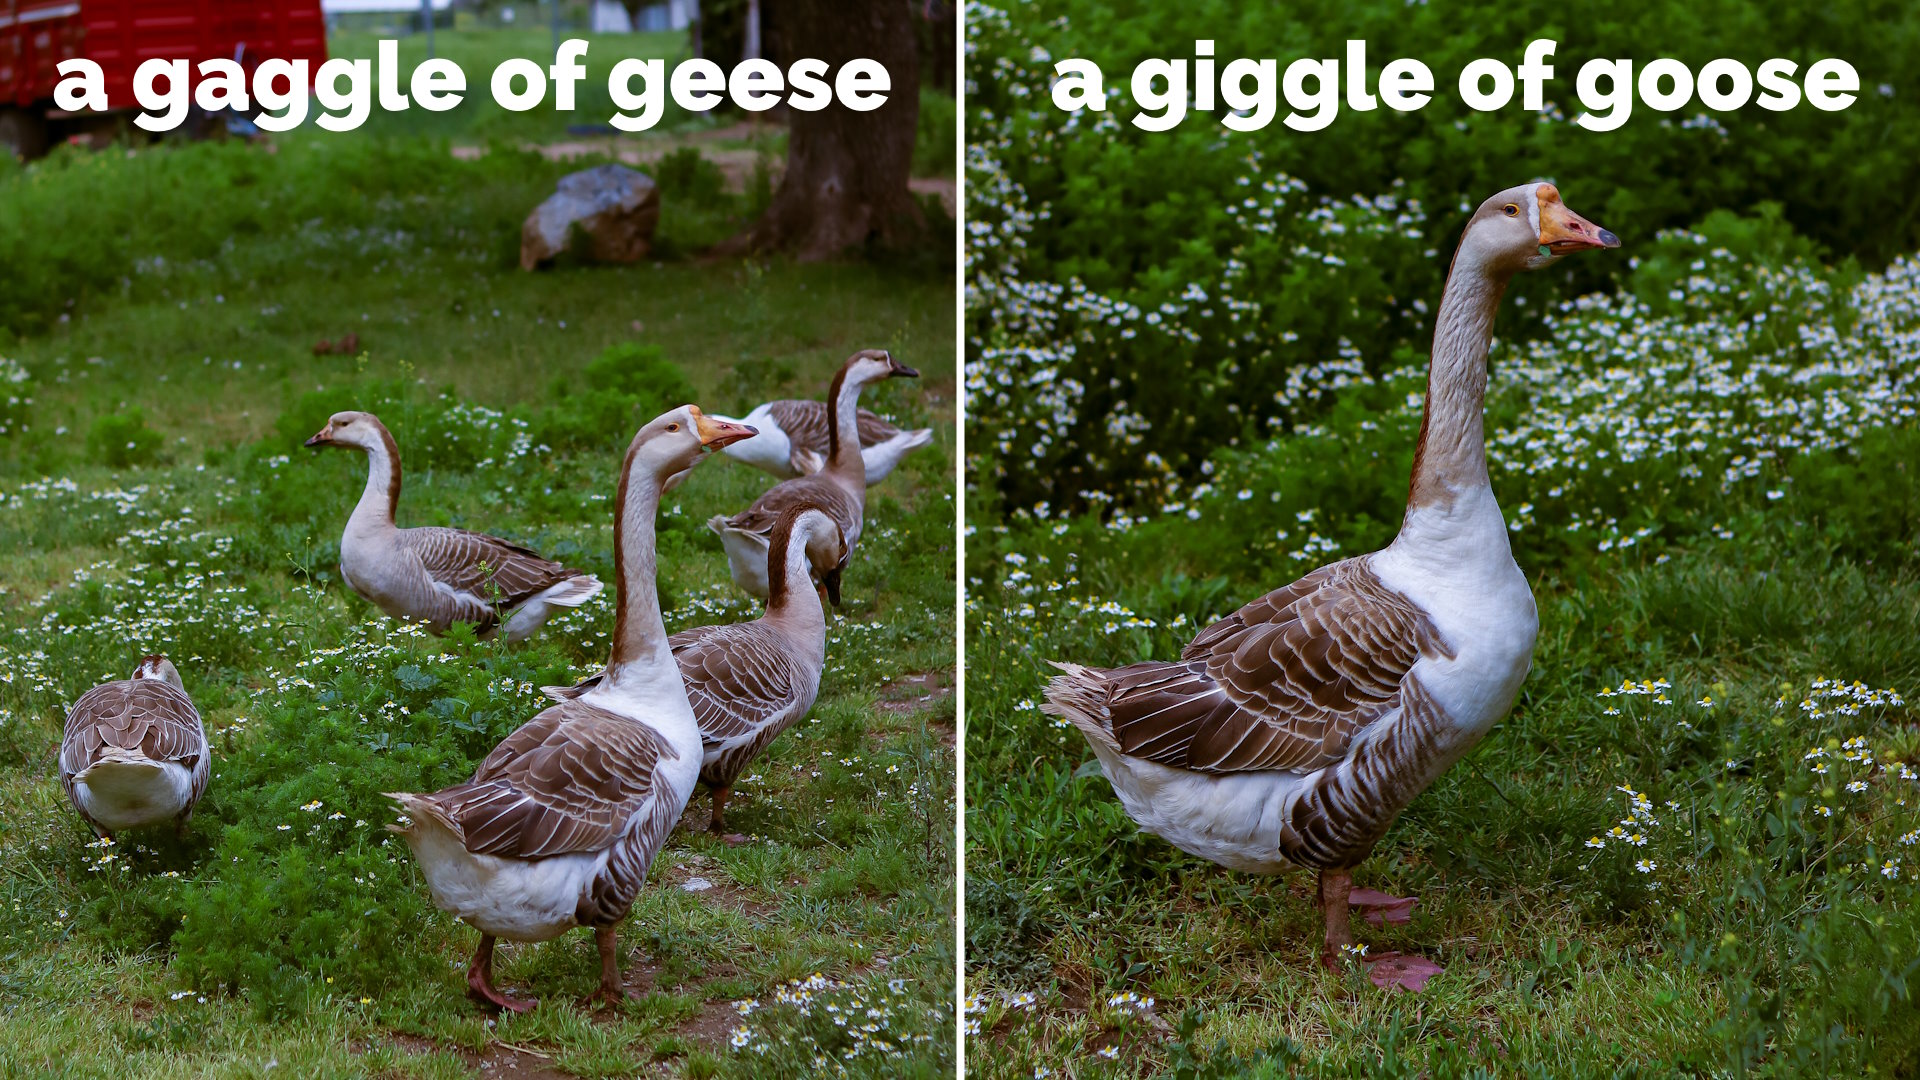 Captioned photos showing "a GAGGLE of GEESE" and "a GIGGLE of GOOSE".